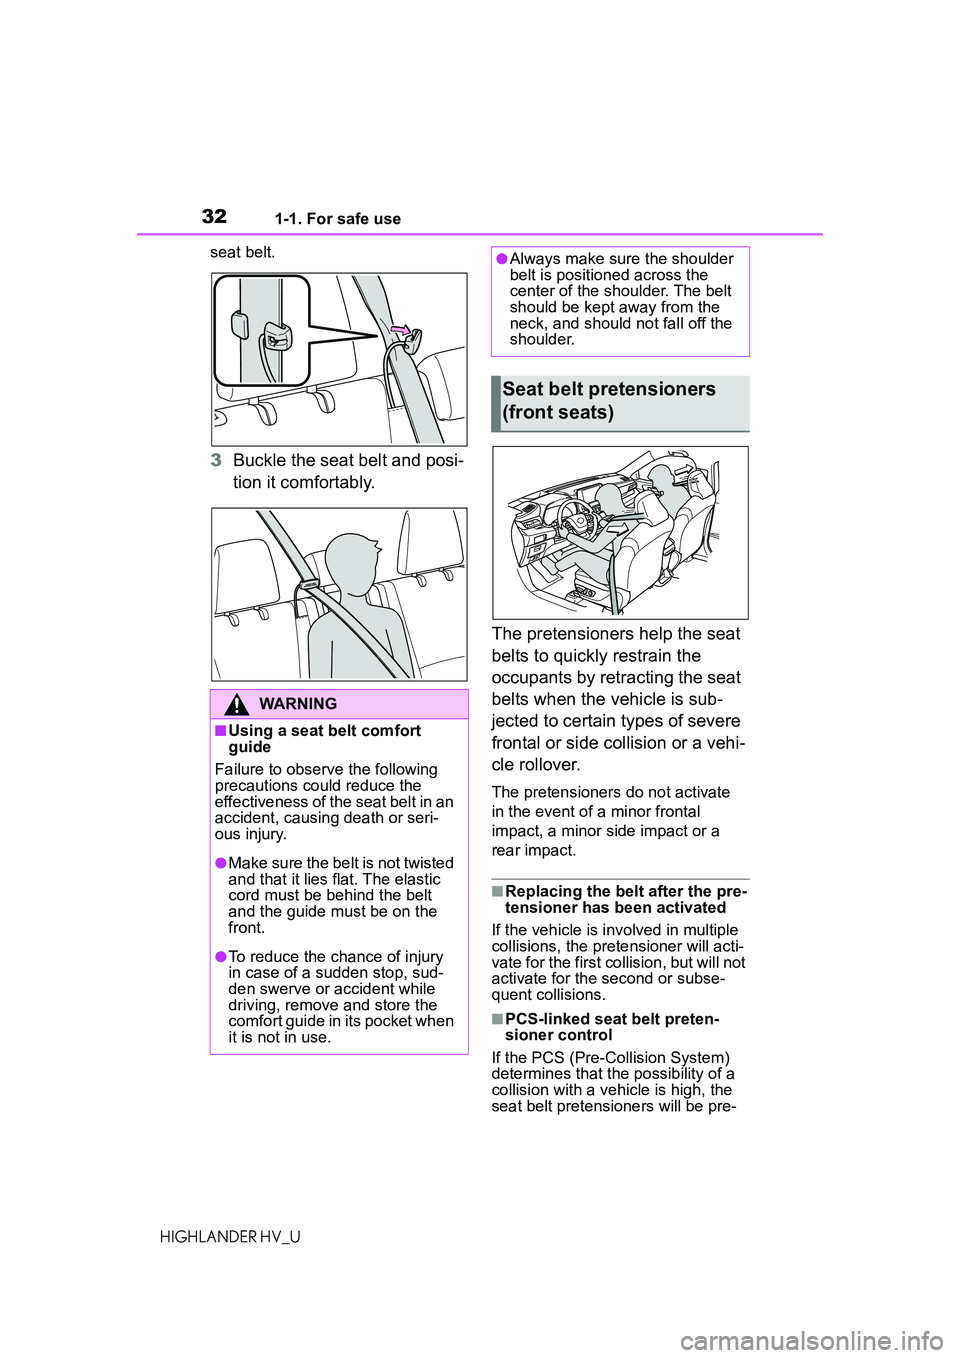 TOYOTA HIGHLANDER HYBRID 2021  Owners Manual (in English) 321-1. For safe use
HIGHLANDER HV_Useat belt.
3
Buckle the seat belt and posi-
tion it comfortably.
The pretensioners help the seat 
belts to quickly restrain the 
occupants by retracting the seat 
be